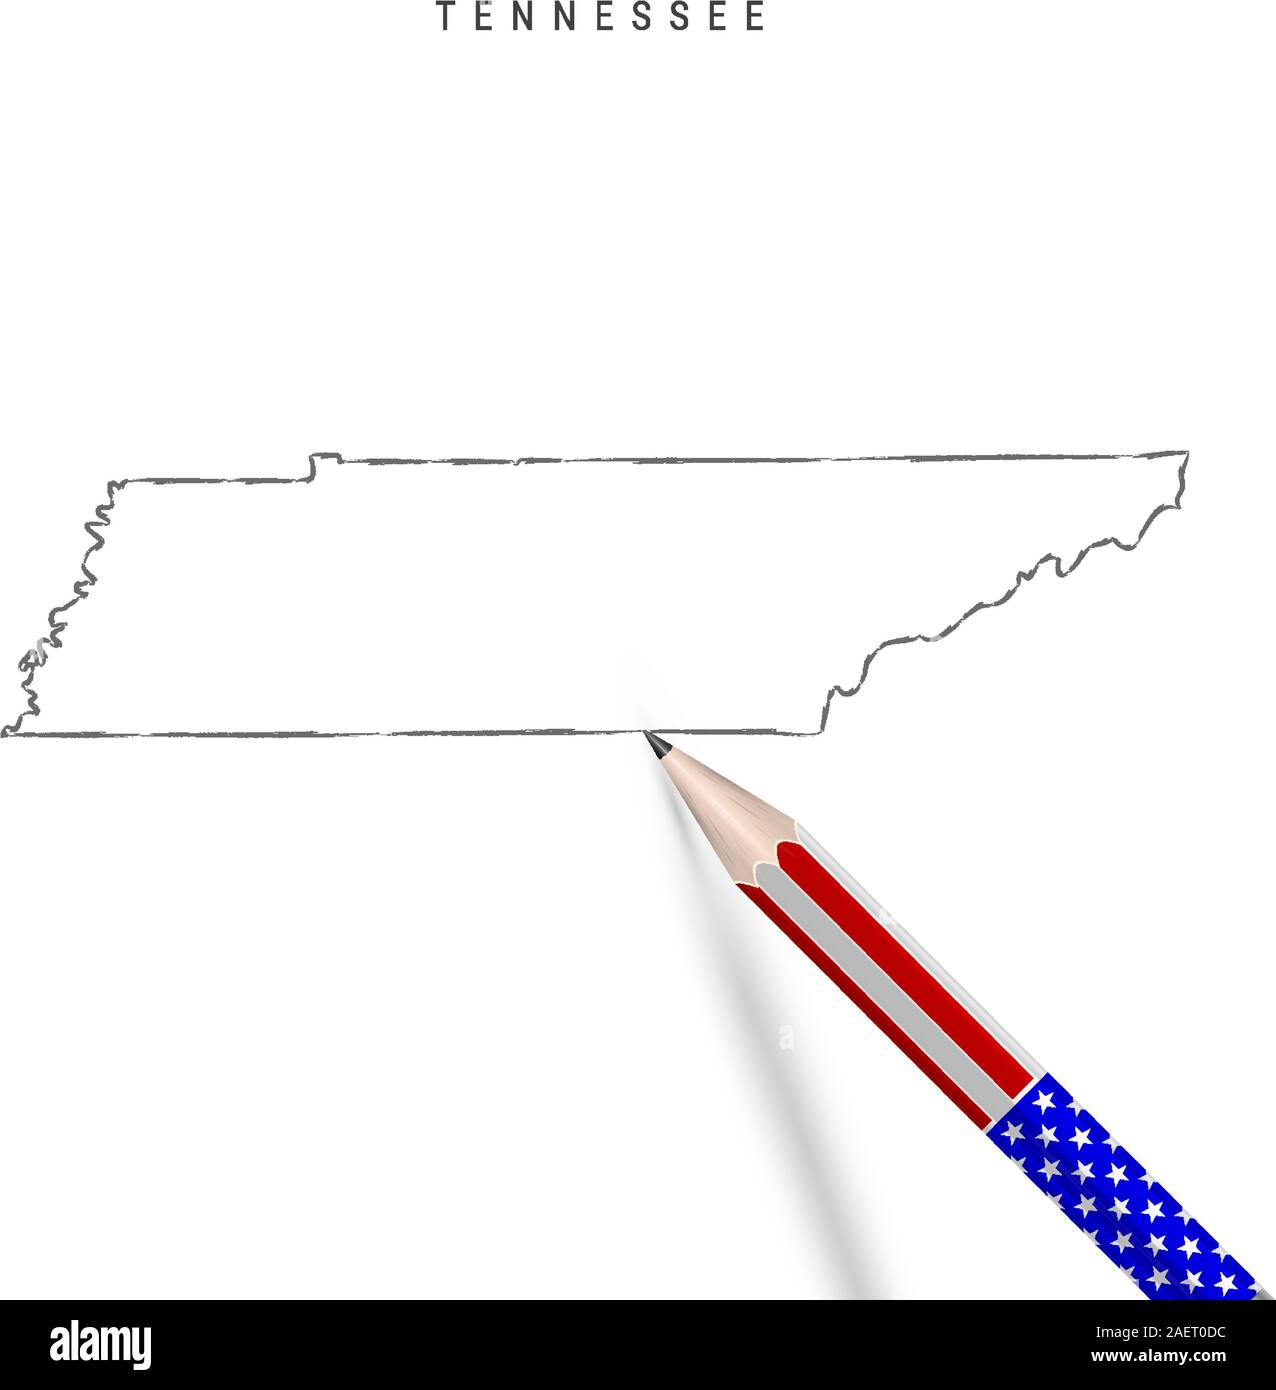 Tennessee US state vector map pencil sketch. Tennessee outline contour map with 3D pencil in american flag colors. Freehand drawing vector, hand drawn Stock Vector